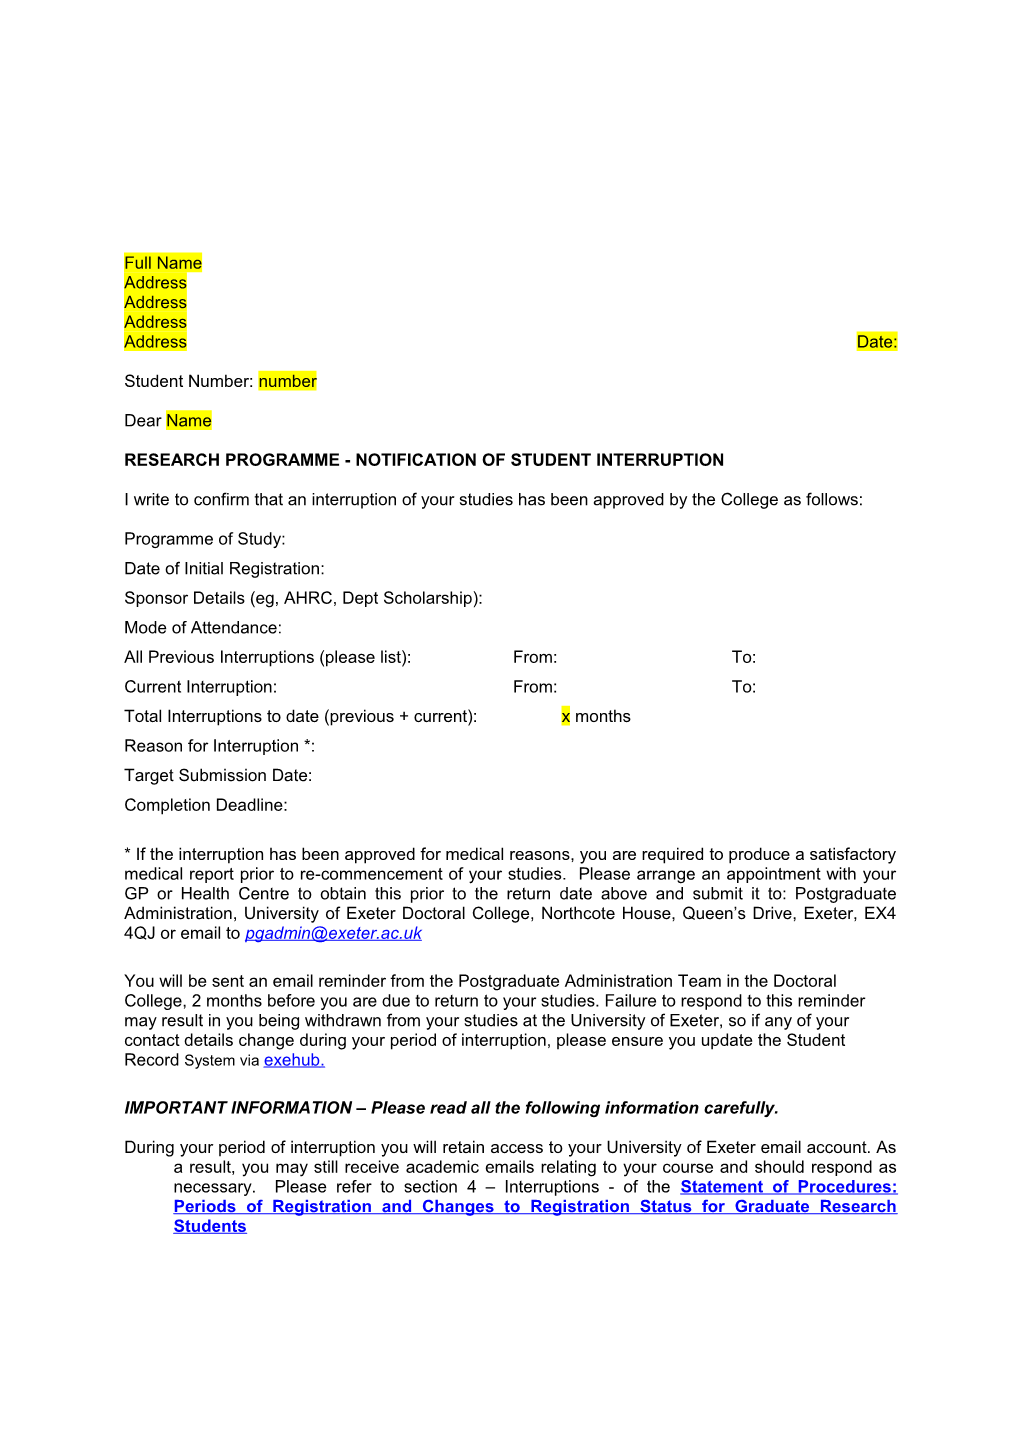 Research Programme - Notification of Student Interruption